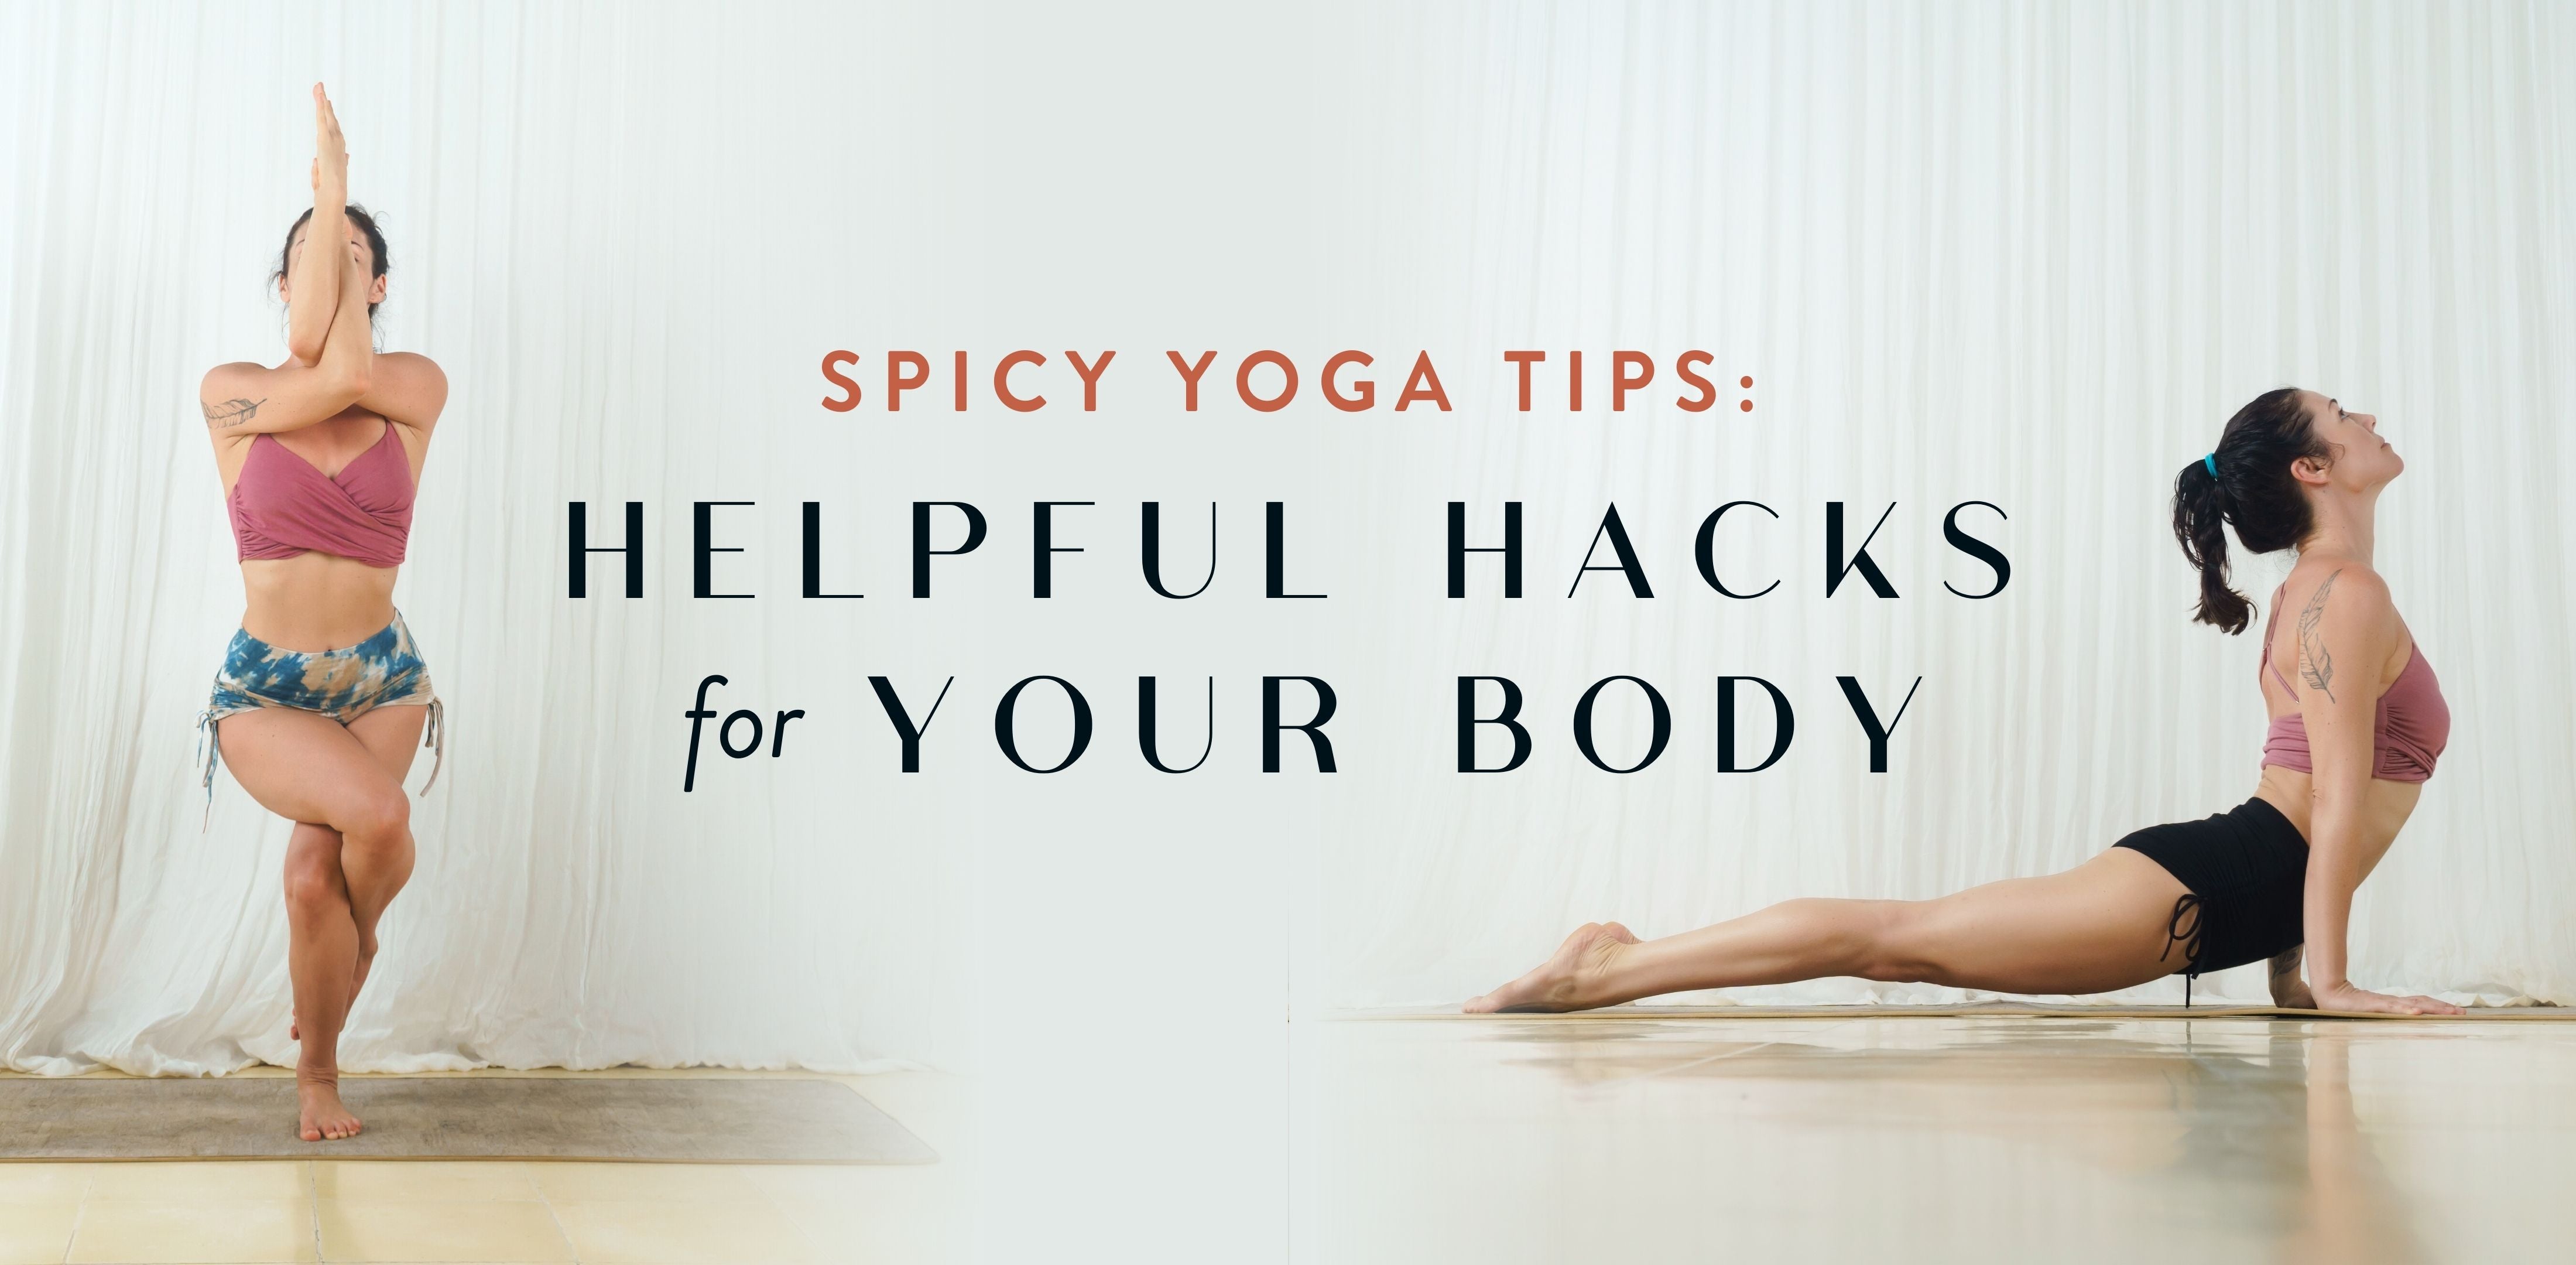 Spicy Yoga Tips: Helpful Hacks for Your Body – Isabelle Moon